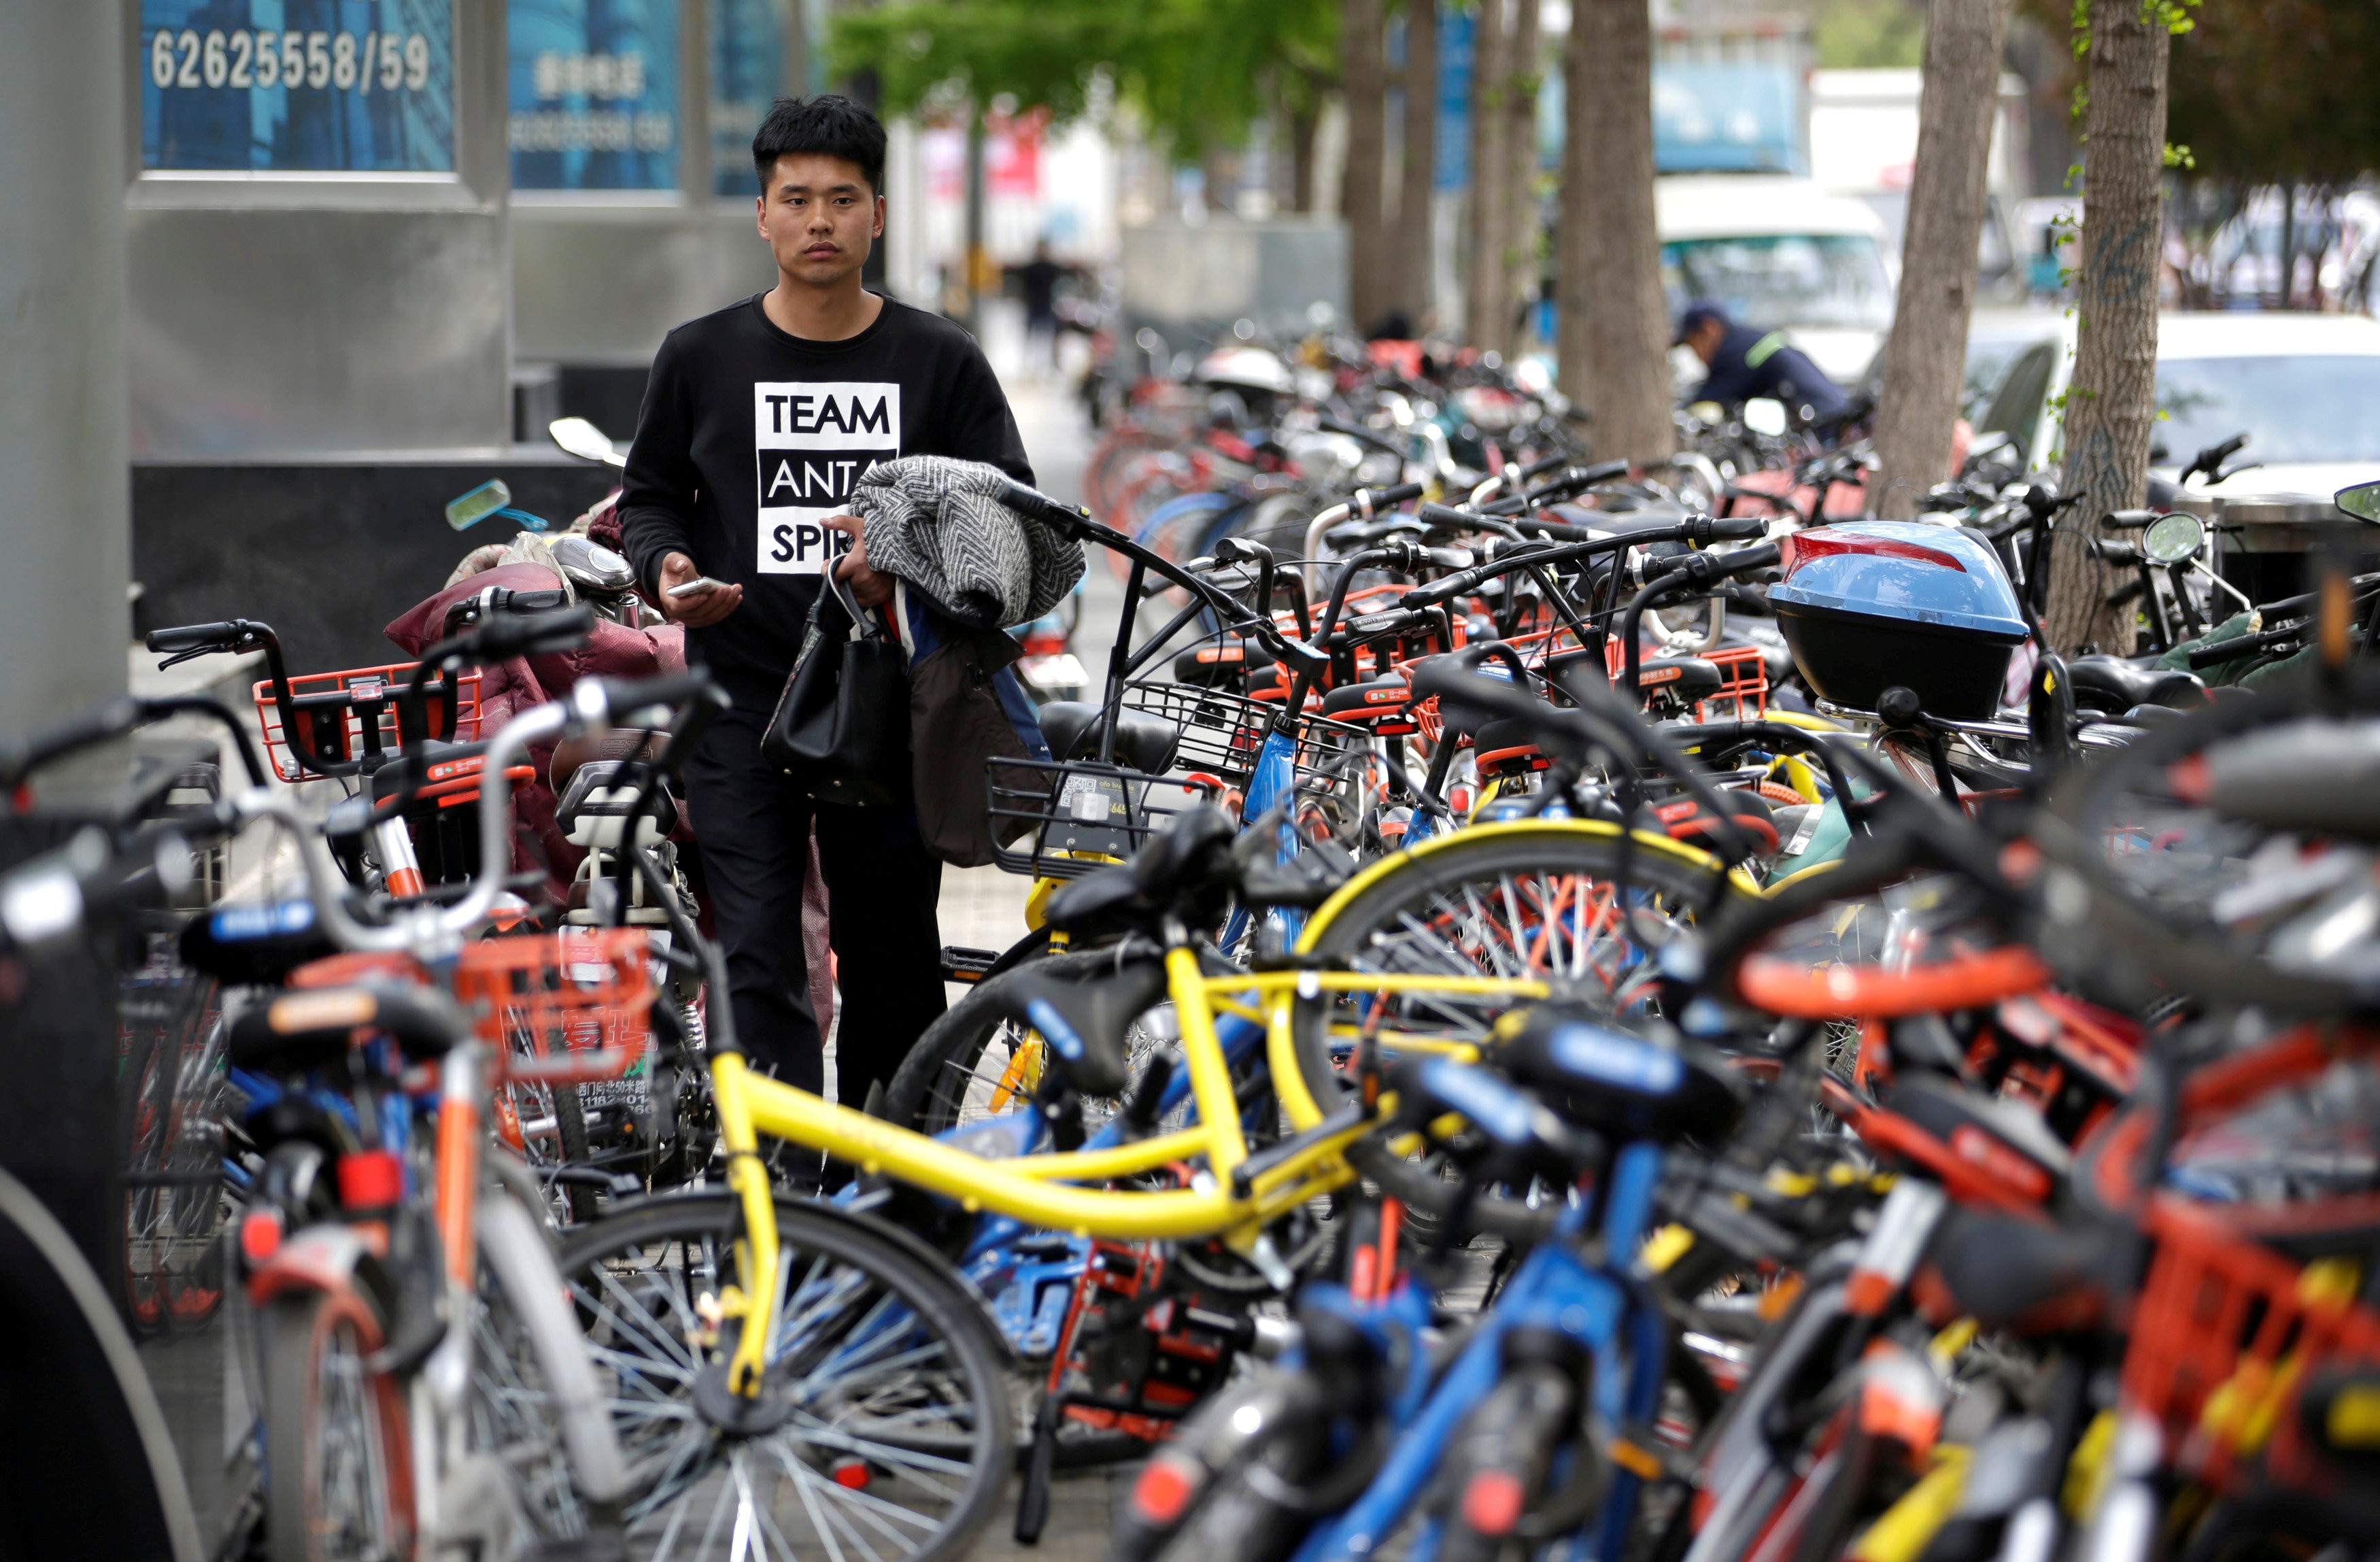 About 72 per cent of bike-sharing users in China can be found in the country’s second- and lower-tier cities